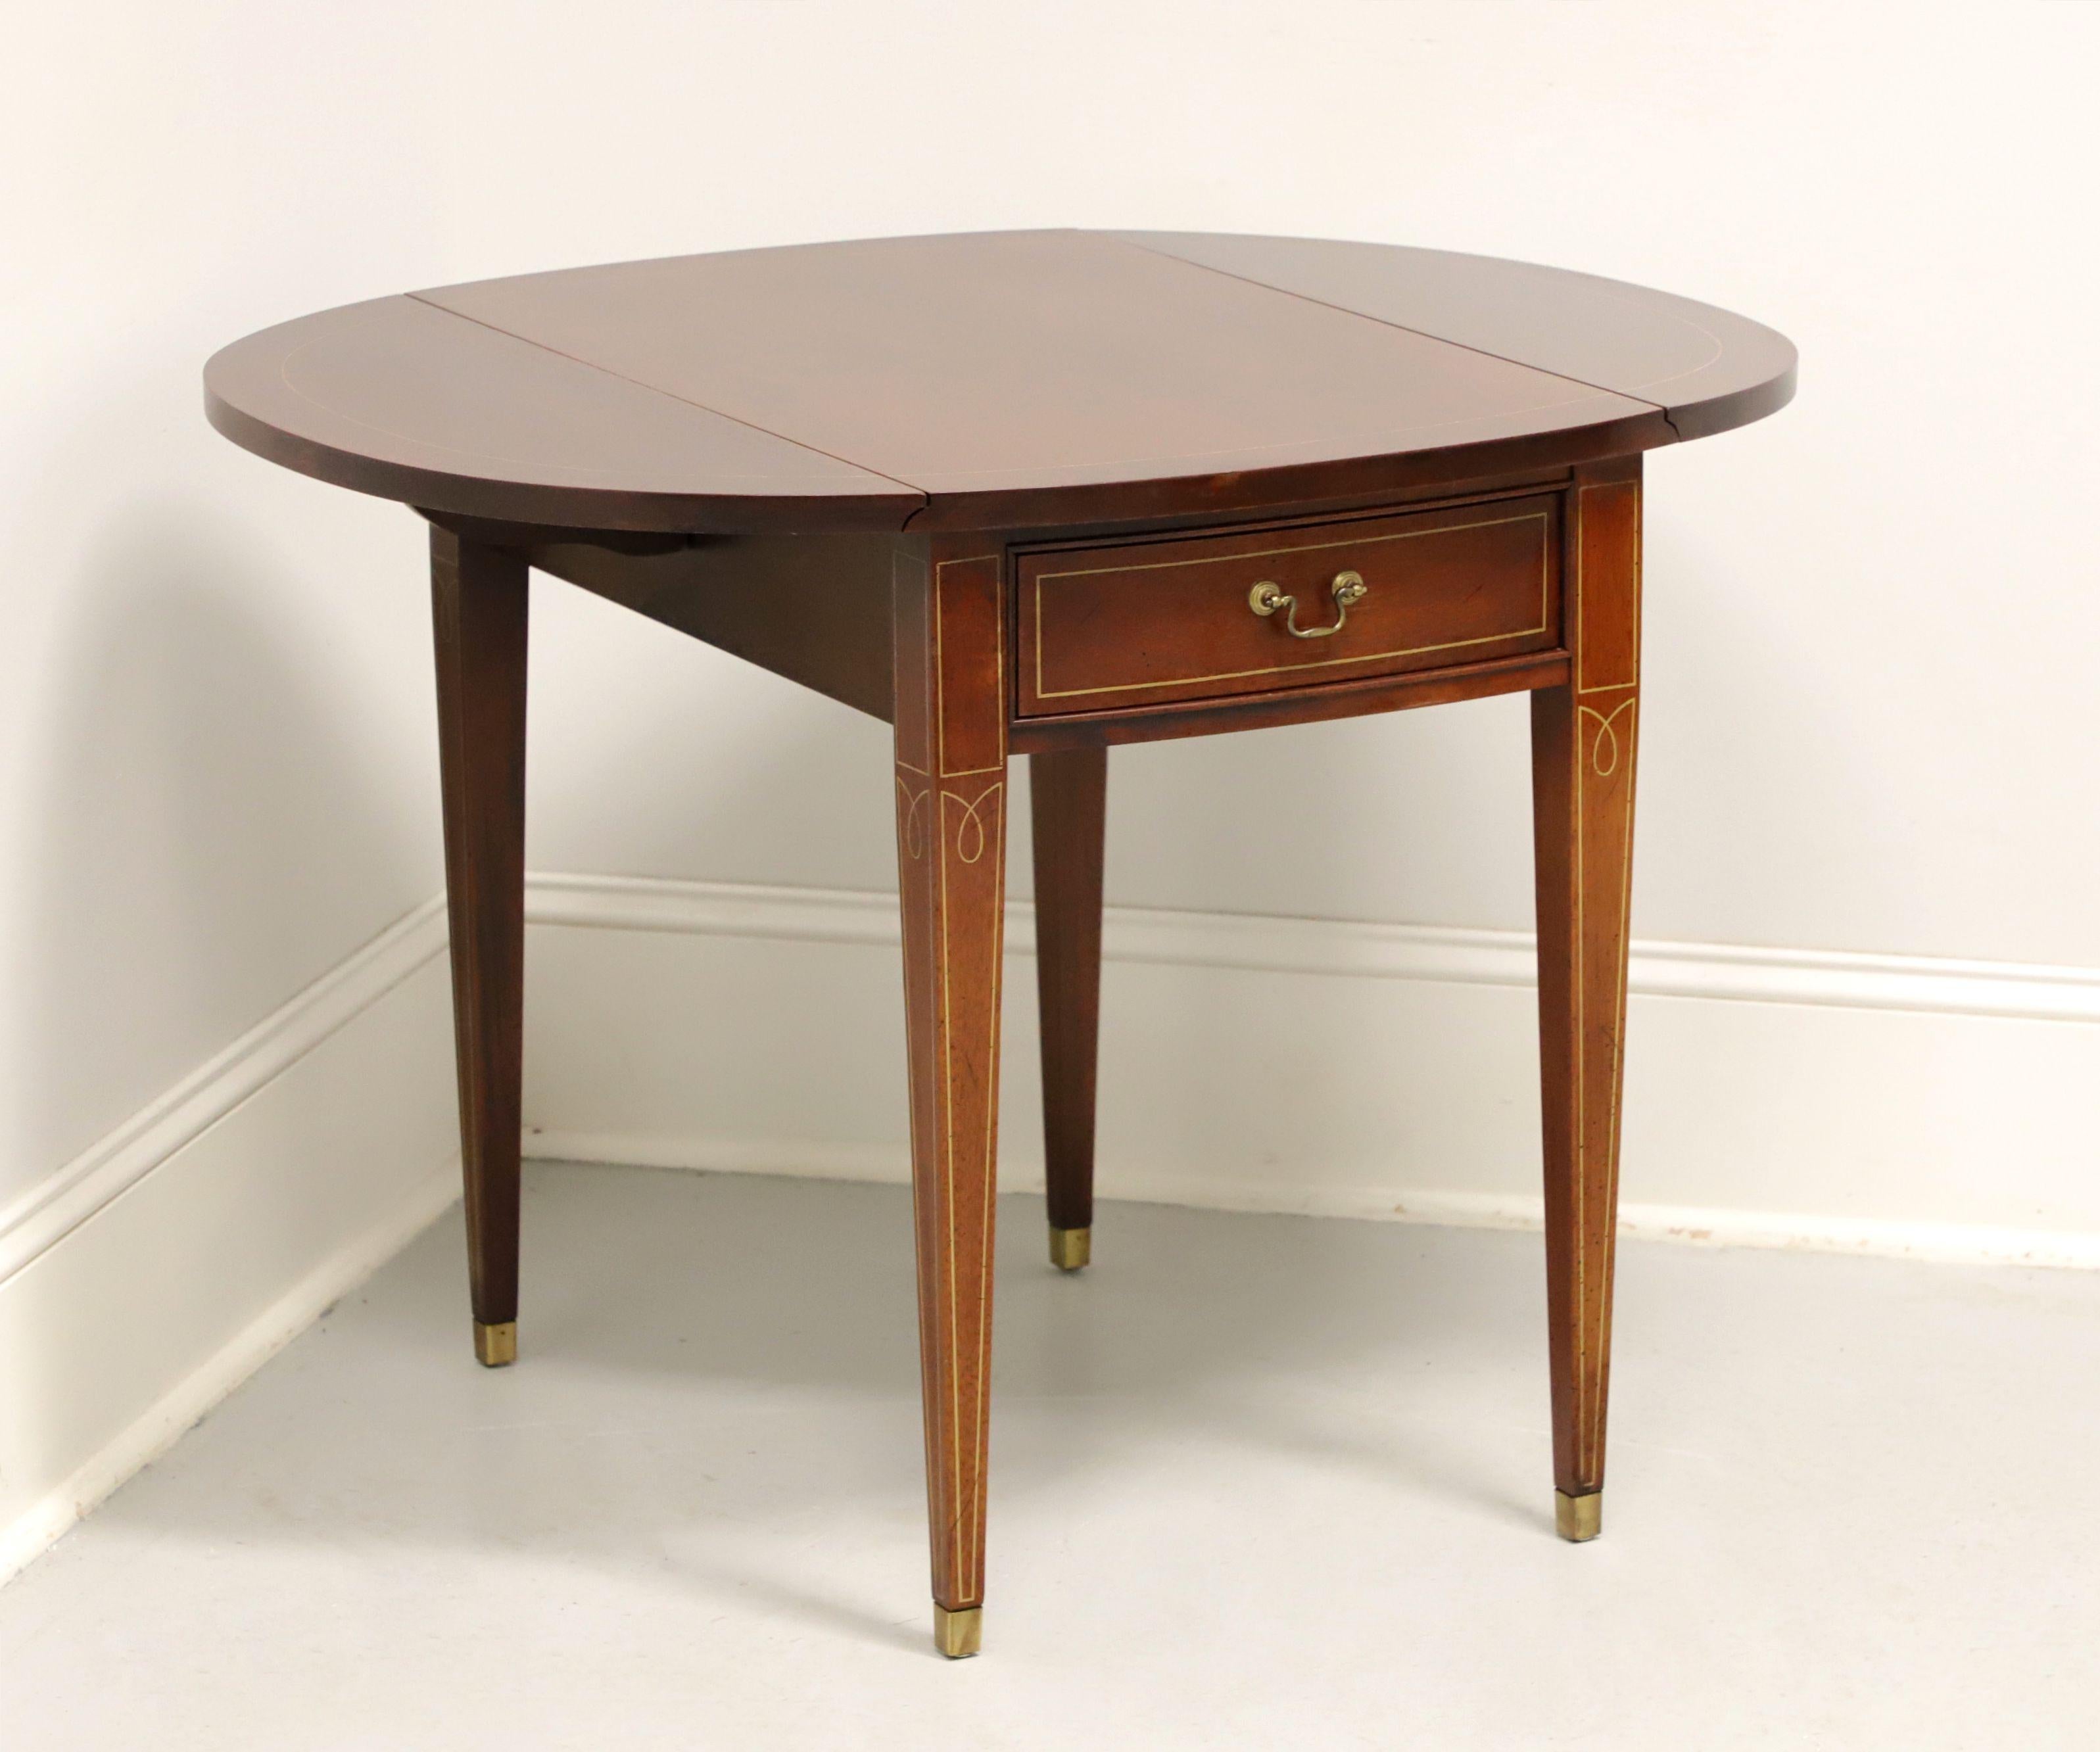 A Hepplewhite style Pembroke table by Hickory Chair, from their Historical James River Plantations Collection. Inlaid mahogany, inlaid string details, drop leaves, brass hardware, tapered straight legs, and brass toe caps. Features one drawer of